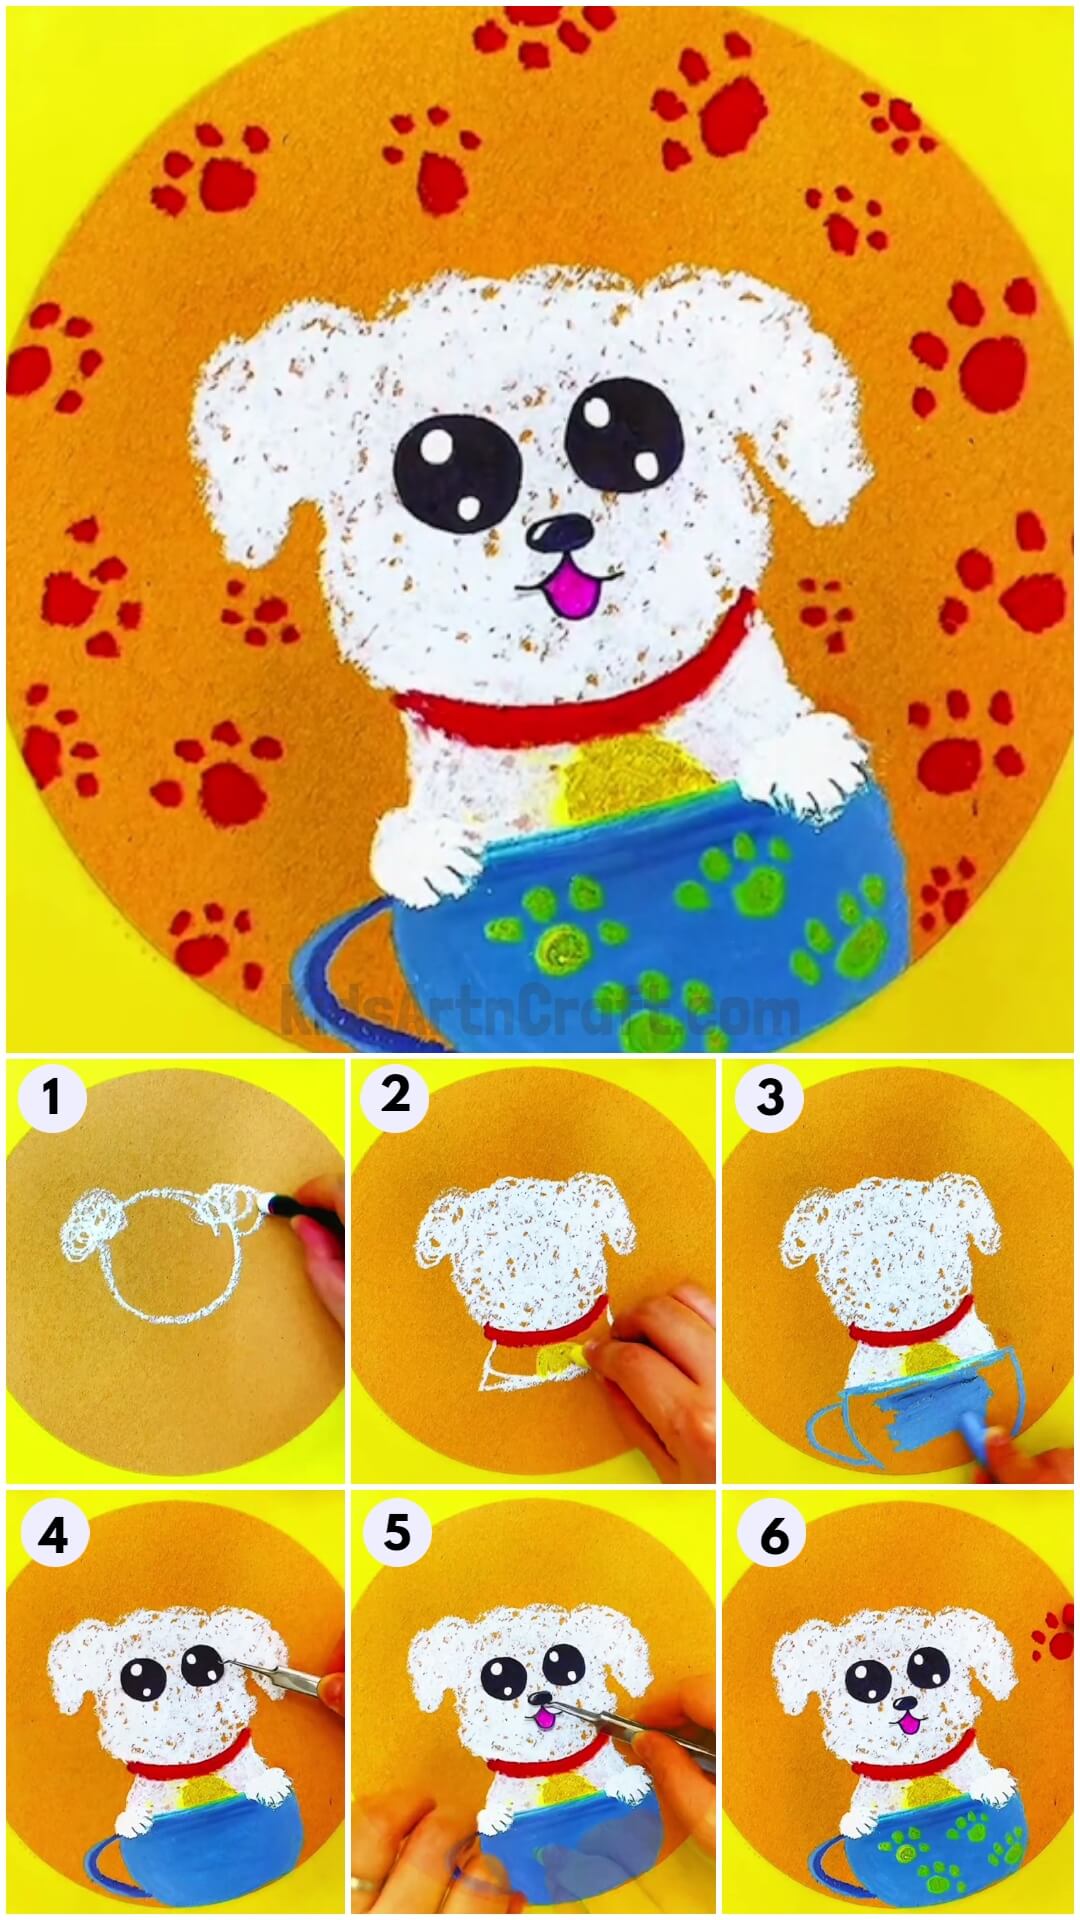 Adorable Puppy Artwork Craft Tutorial For Kids